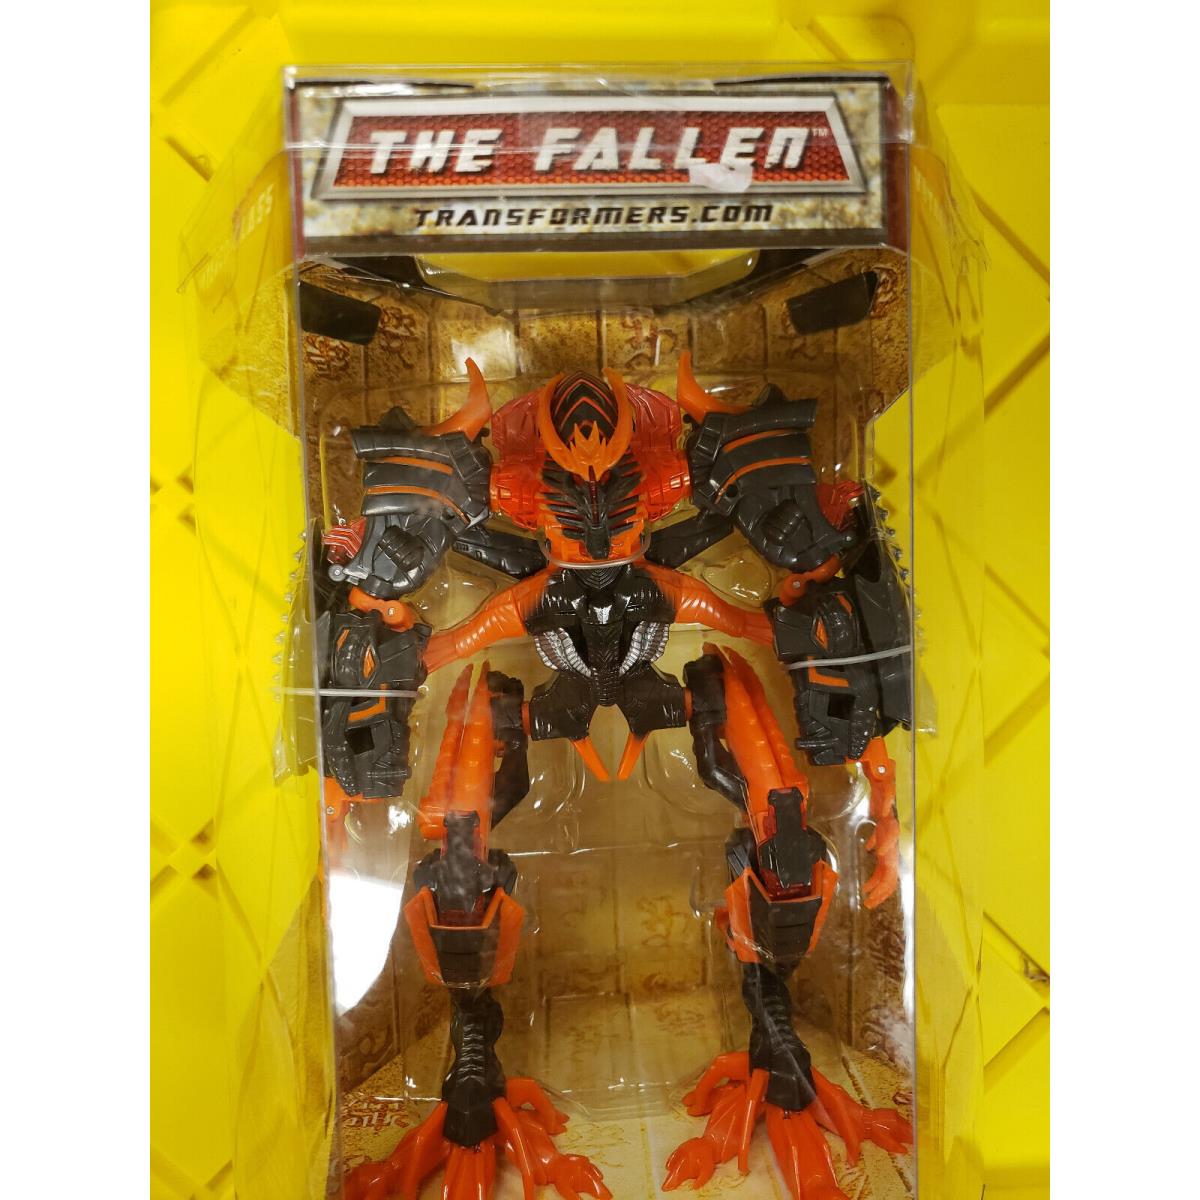 Transformers Rotf The Fallen Target Exclusive